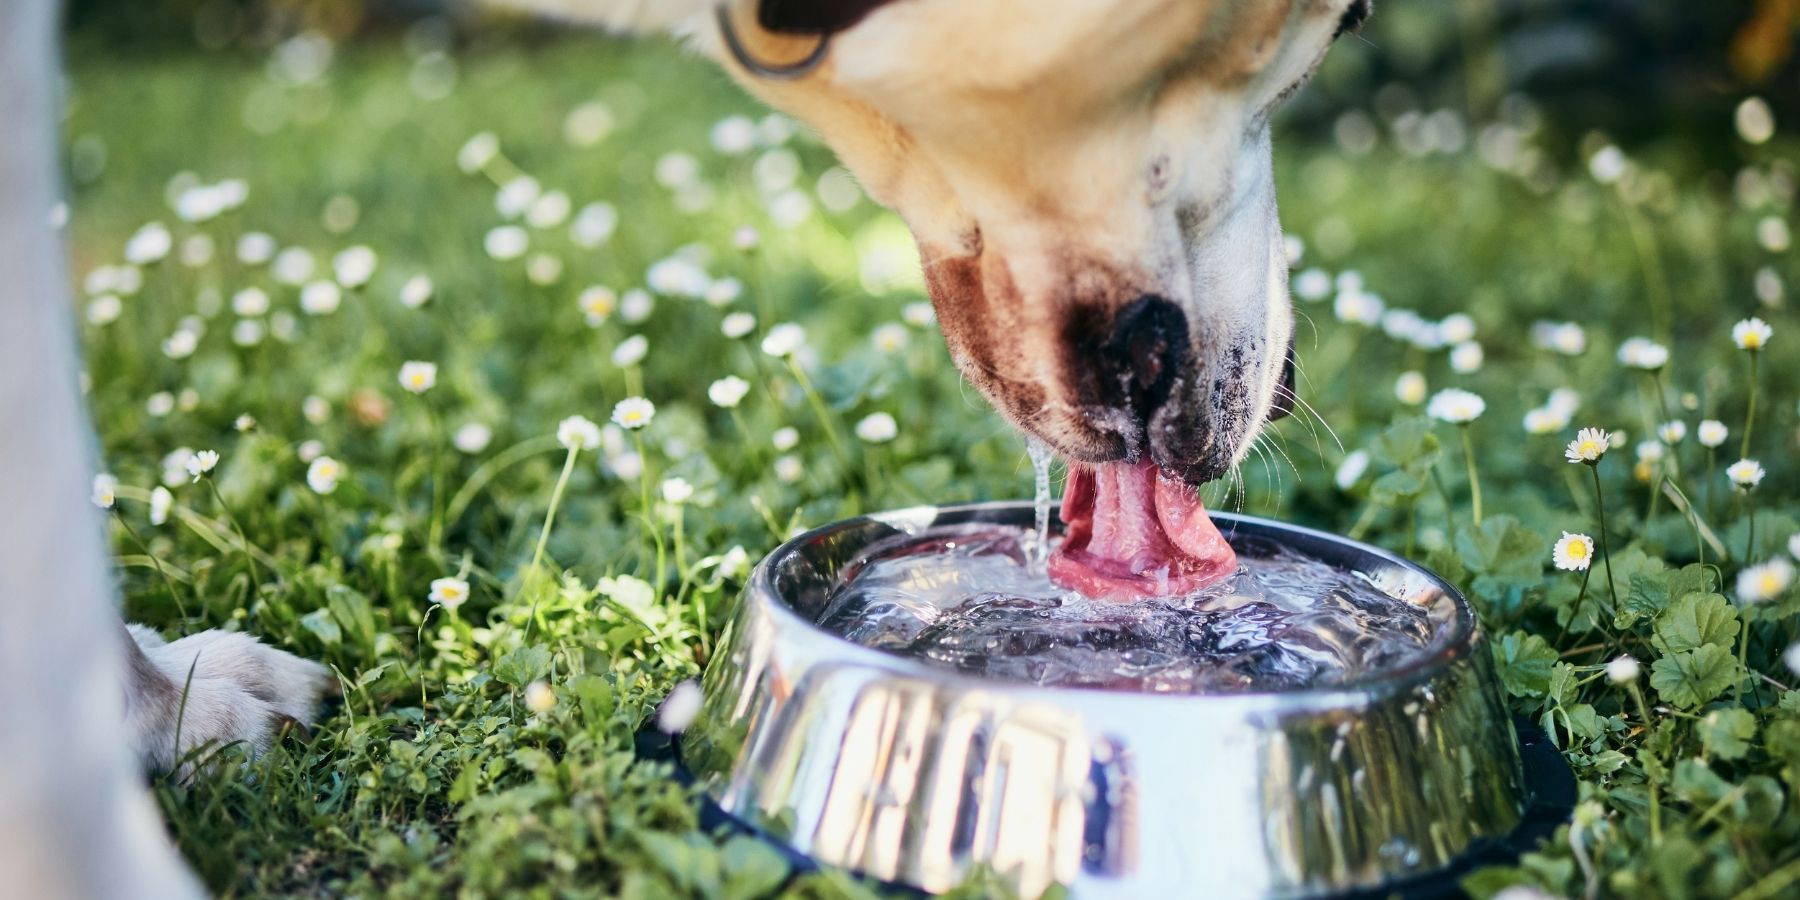 Why Is My Aging Dog Drinking More Water Than Usual?